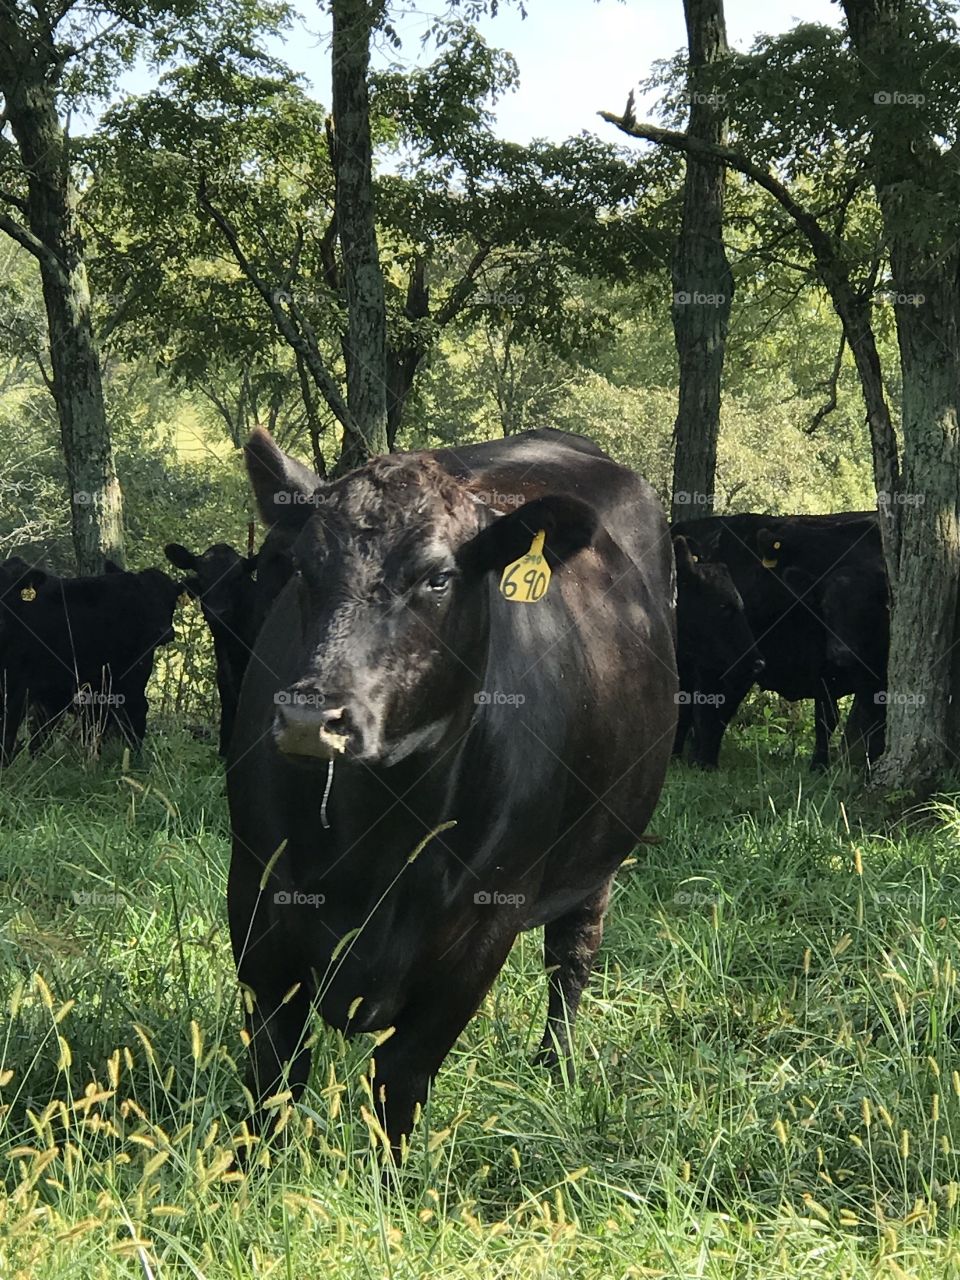 Black angus cattle in a field, one heifer standing closet to camera.